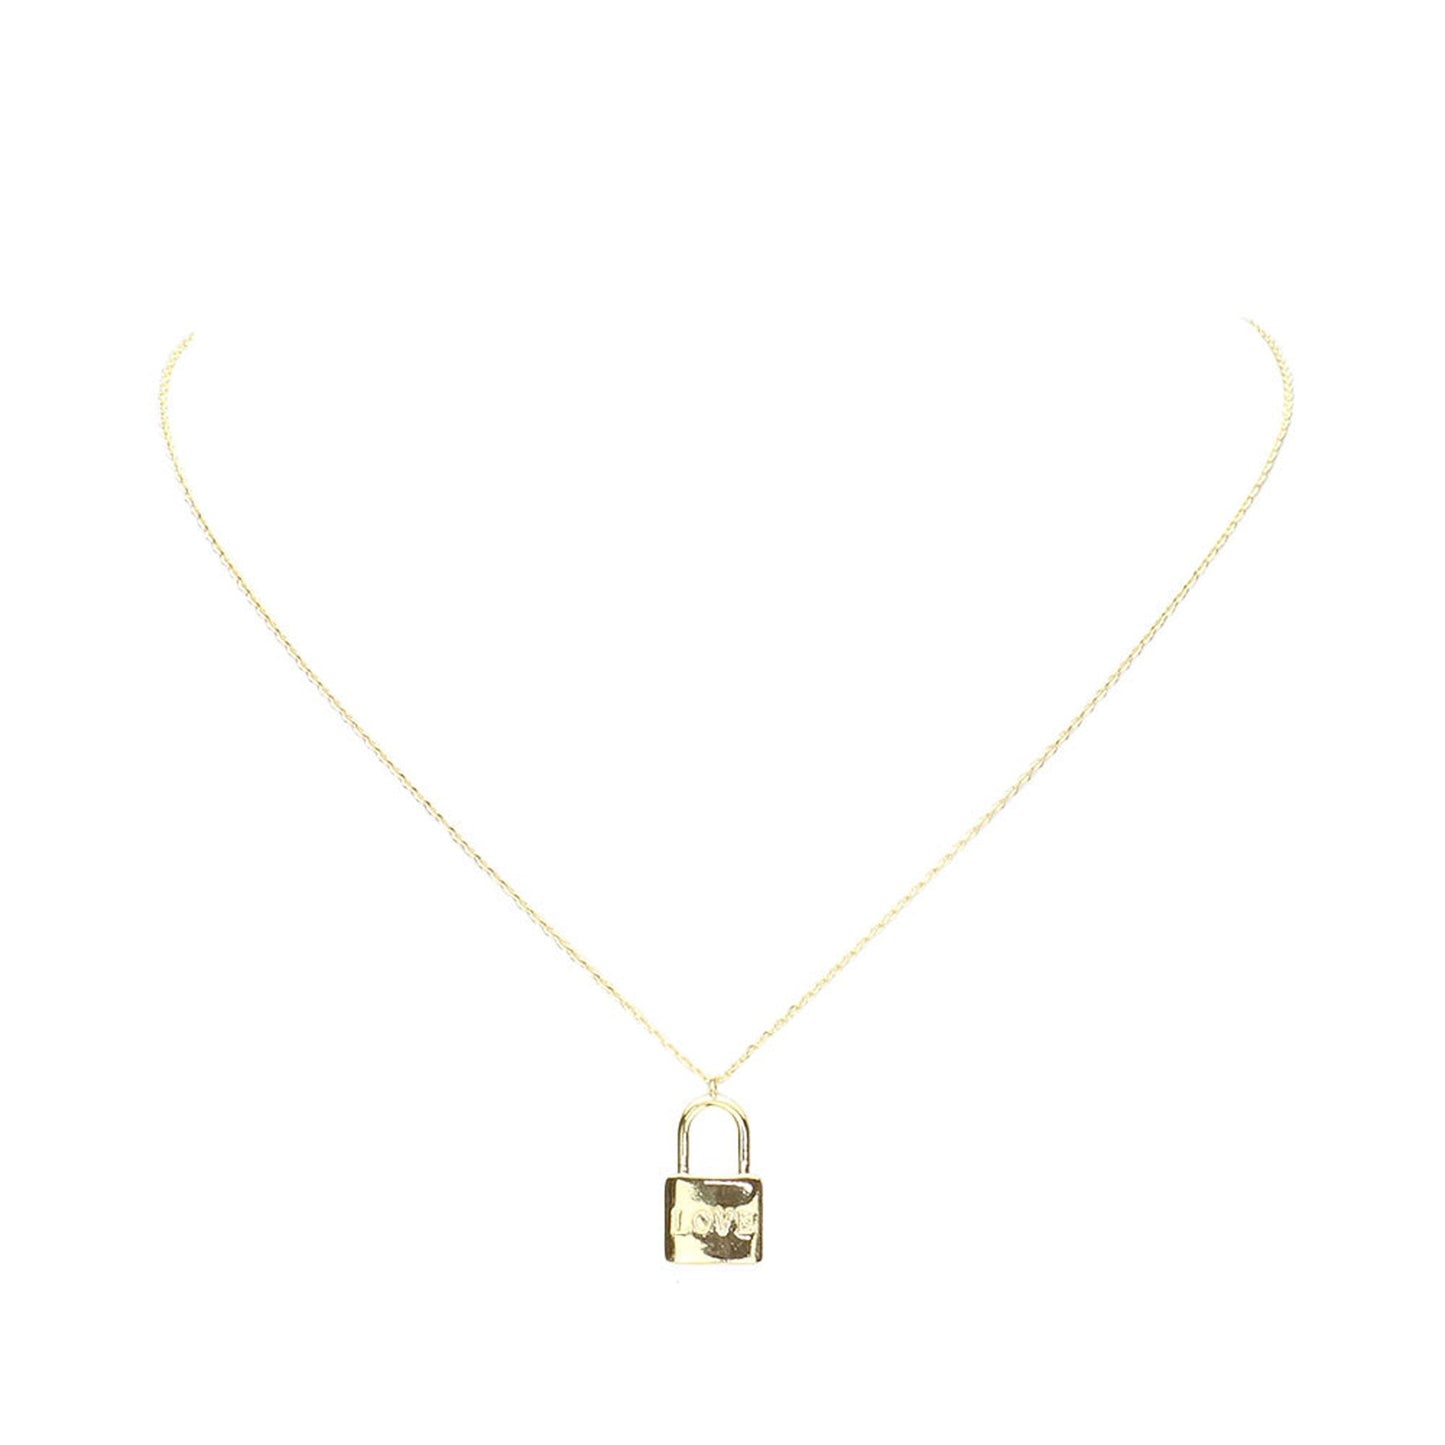 Gold Love White Gold Dipped Metal Lock Pendant Necklace, Get ready with these Pendant Necklace, put on a pop of color to complete your ensemble. Perfect for adding just the right amount of shimmer & shine and a touch of class to special events. Perfect Birthday Gift, Valentine's Gift, Anniversary Gift, Mother's Day Gift.